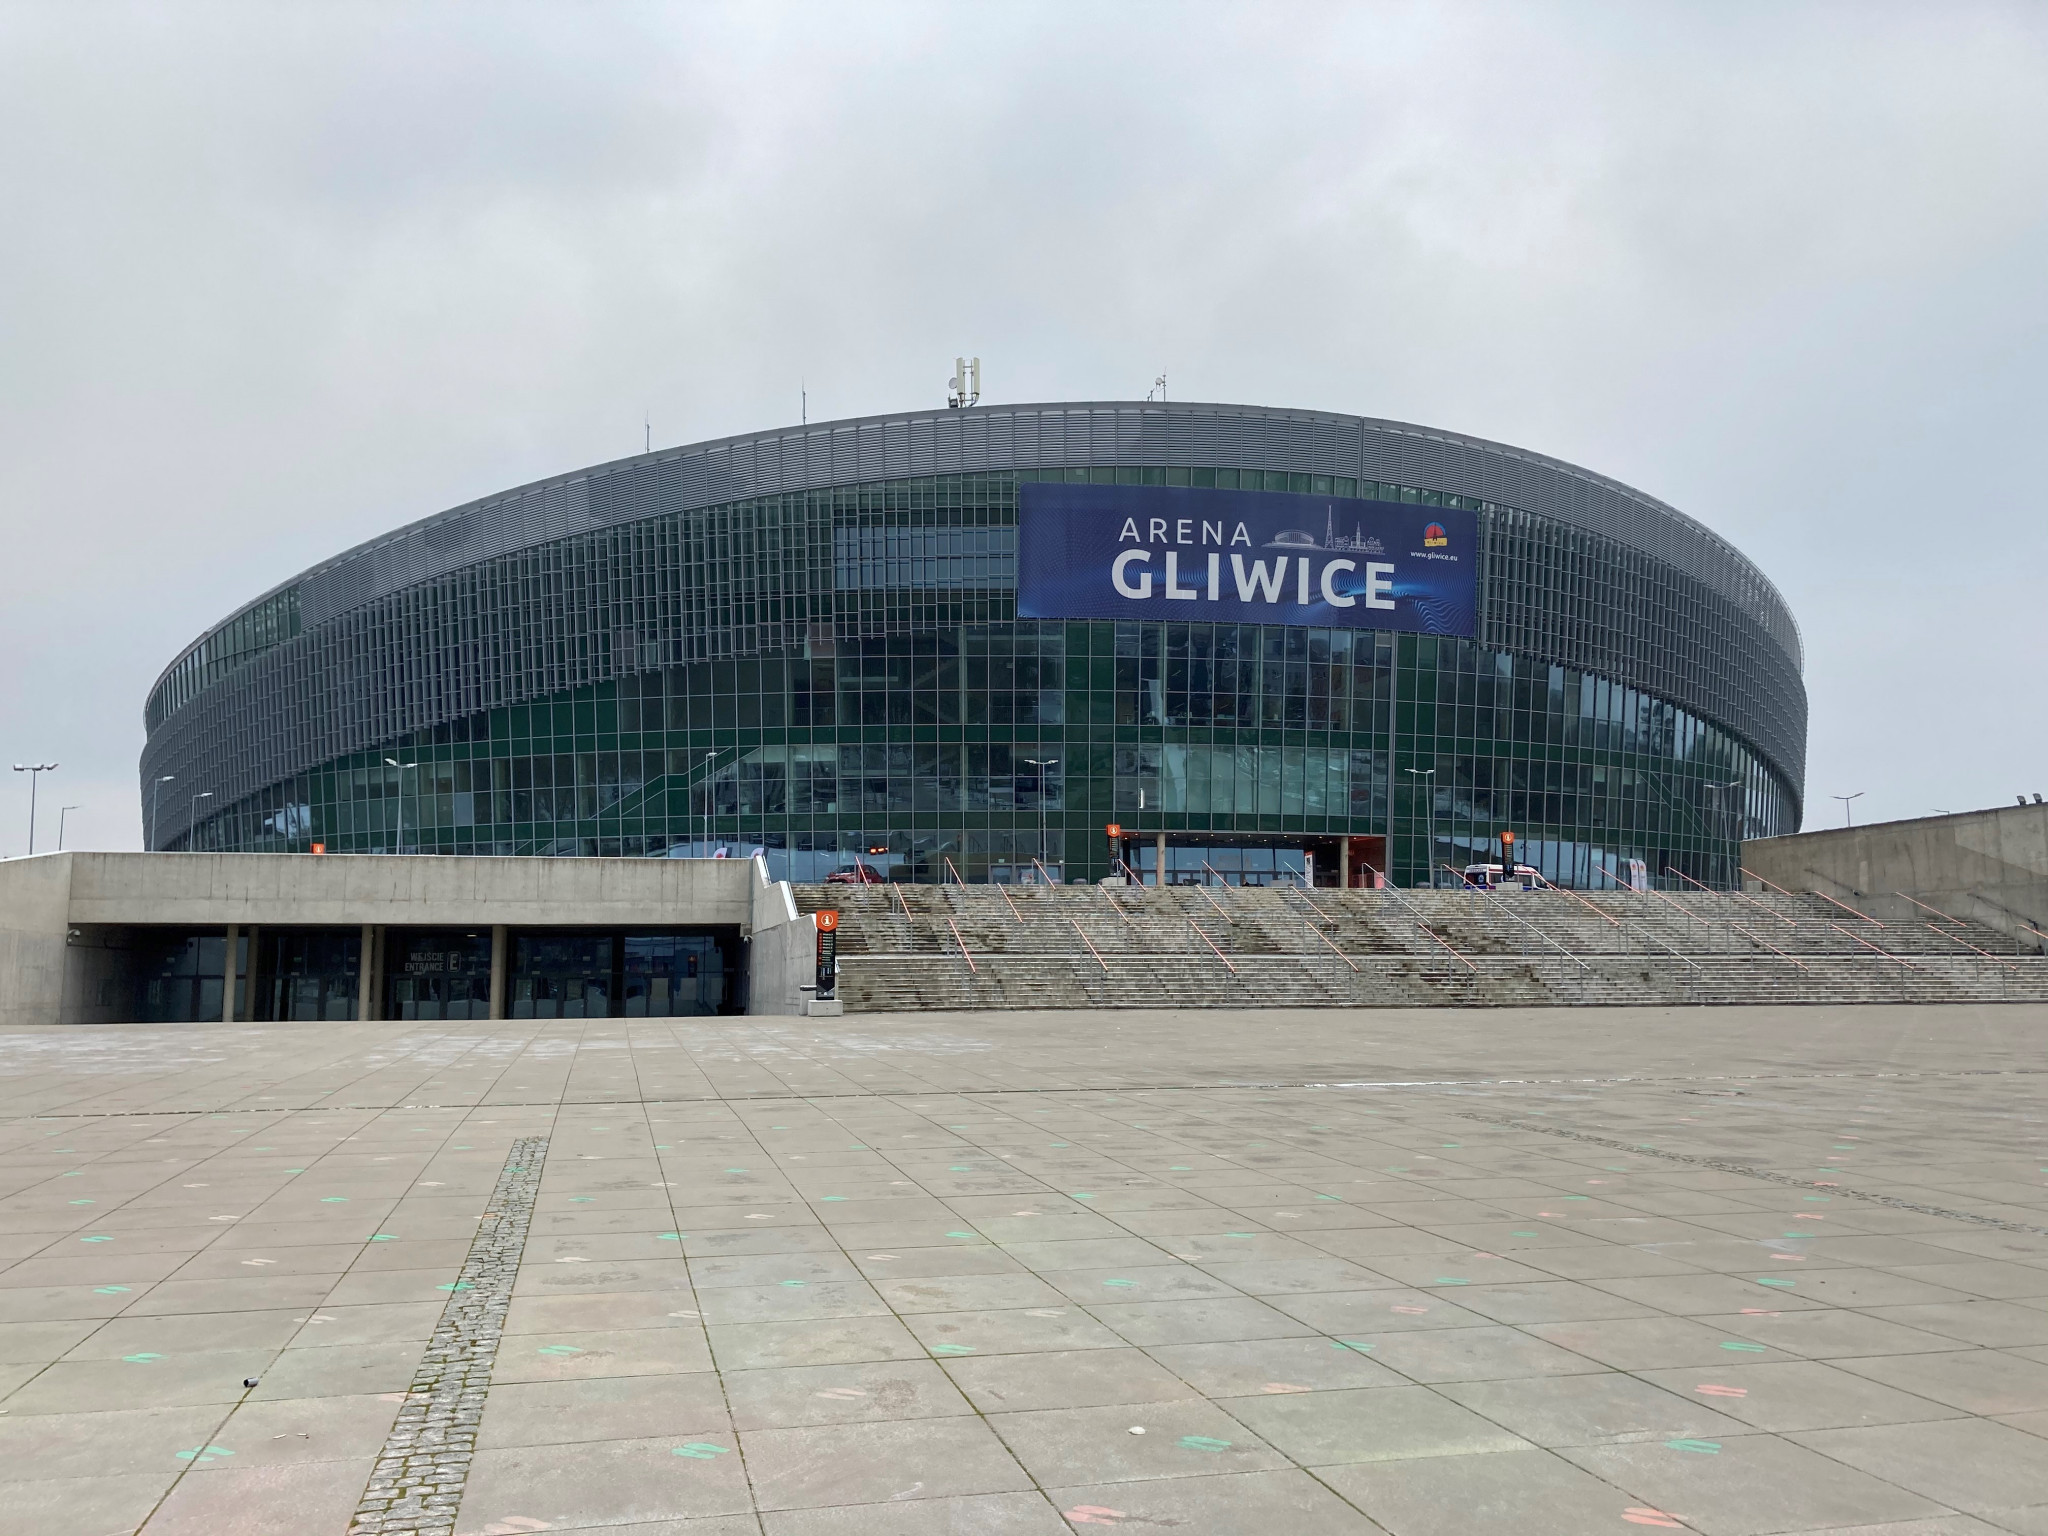 Csaba Bányik of Hungary said the Gliwice Arena, the venue for this year's Teqball World Championships, is 